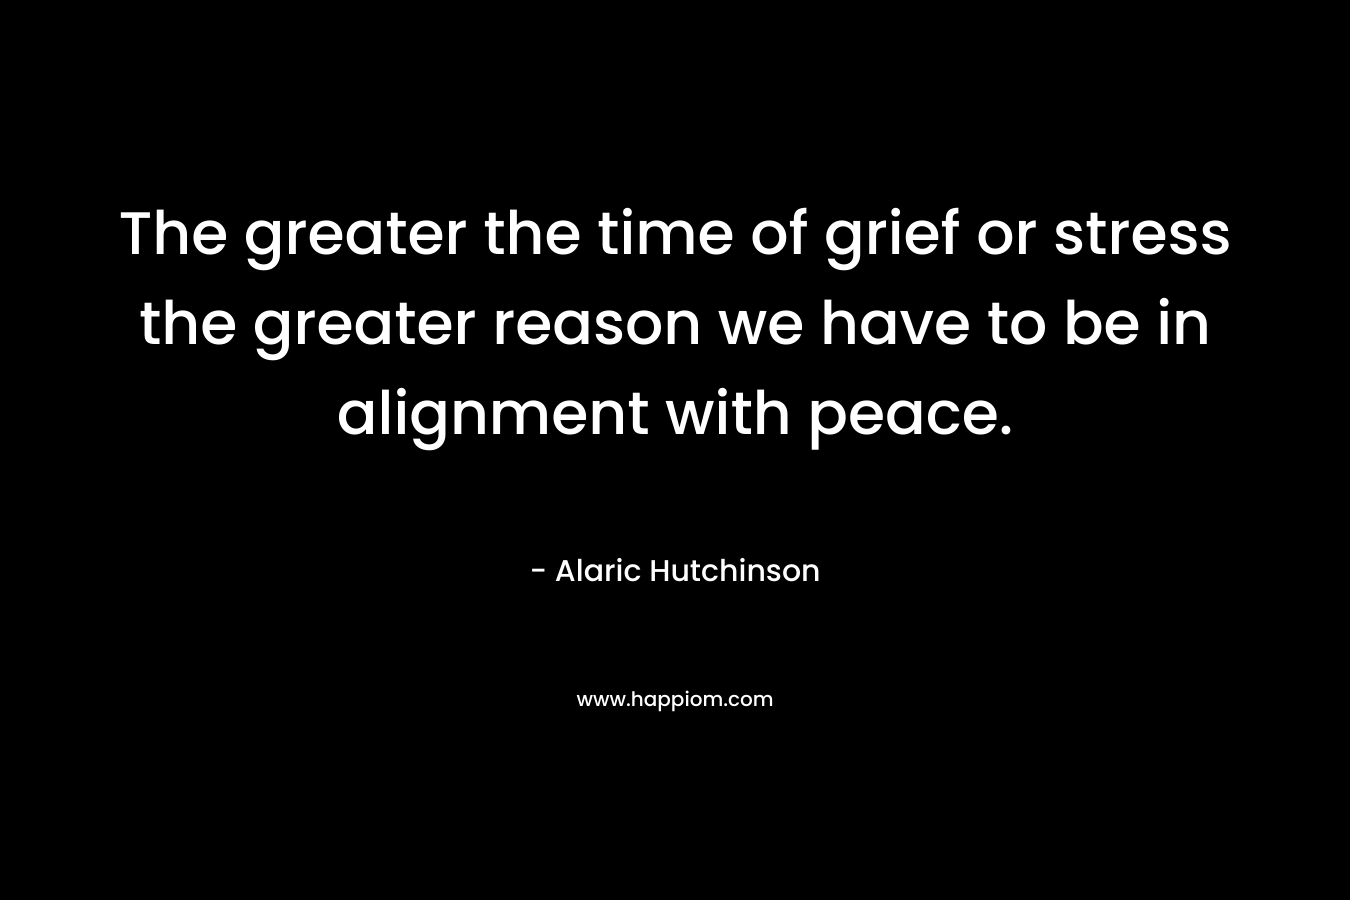 The greater the time of grief or stress the greater reason we have to be in alignment with peace.